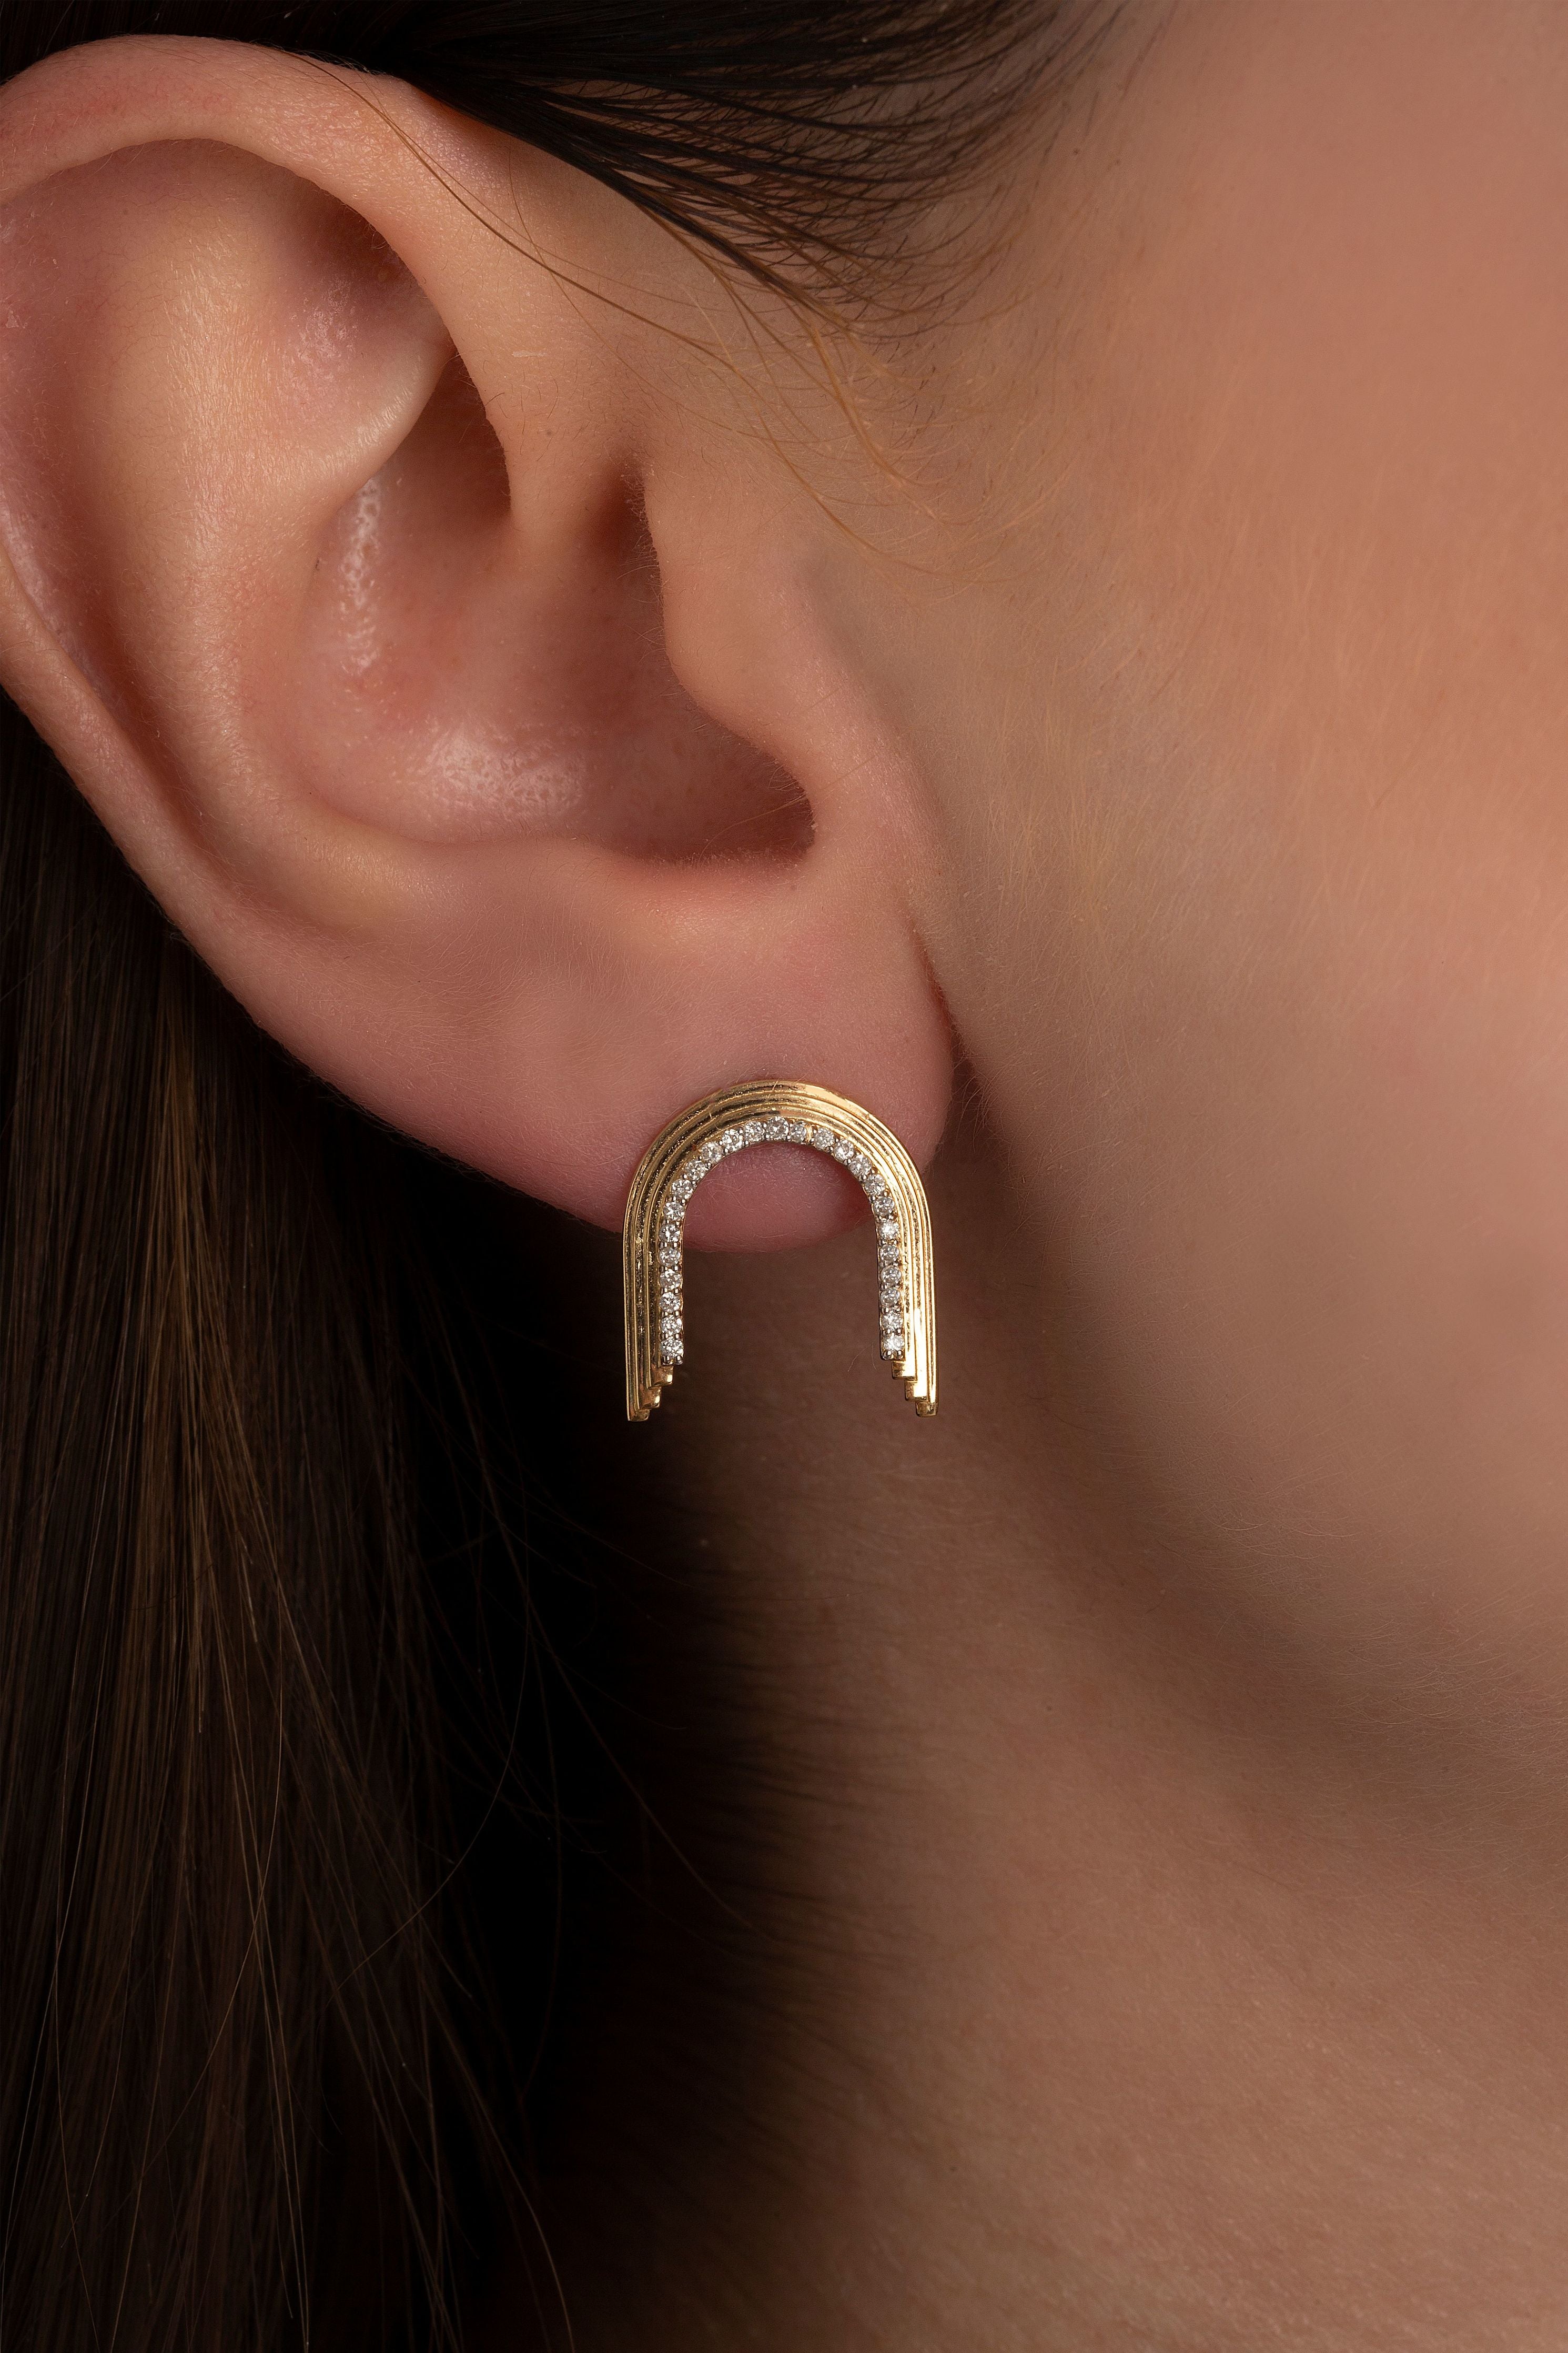 Concave Arch Earring in Rose Gold - Her Story Shop